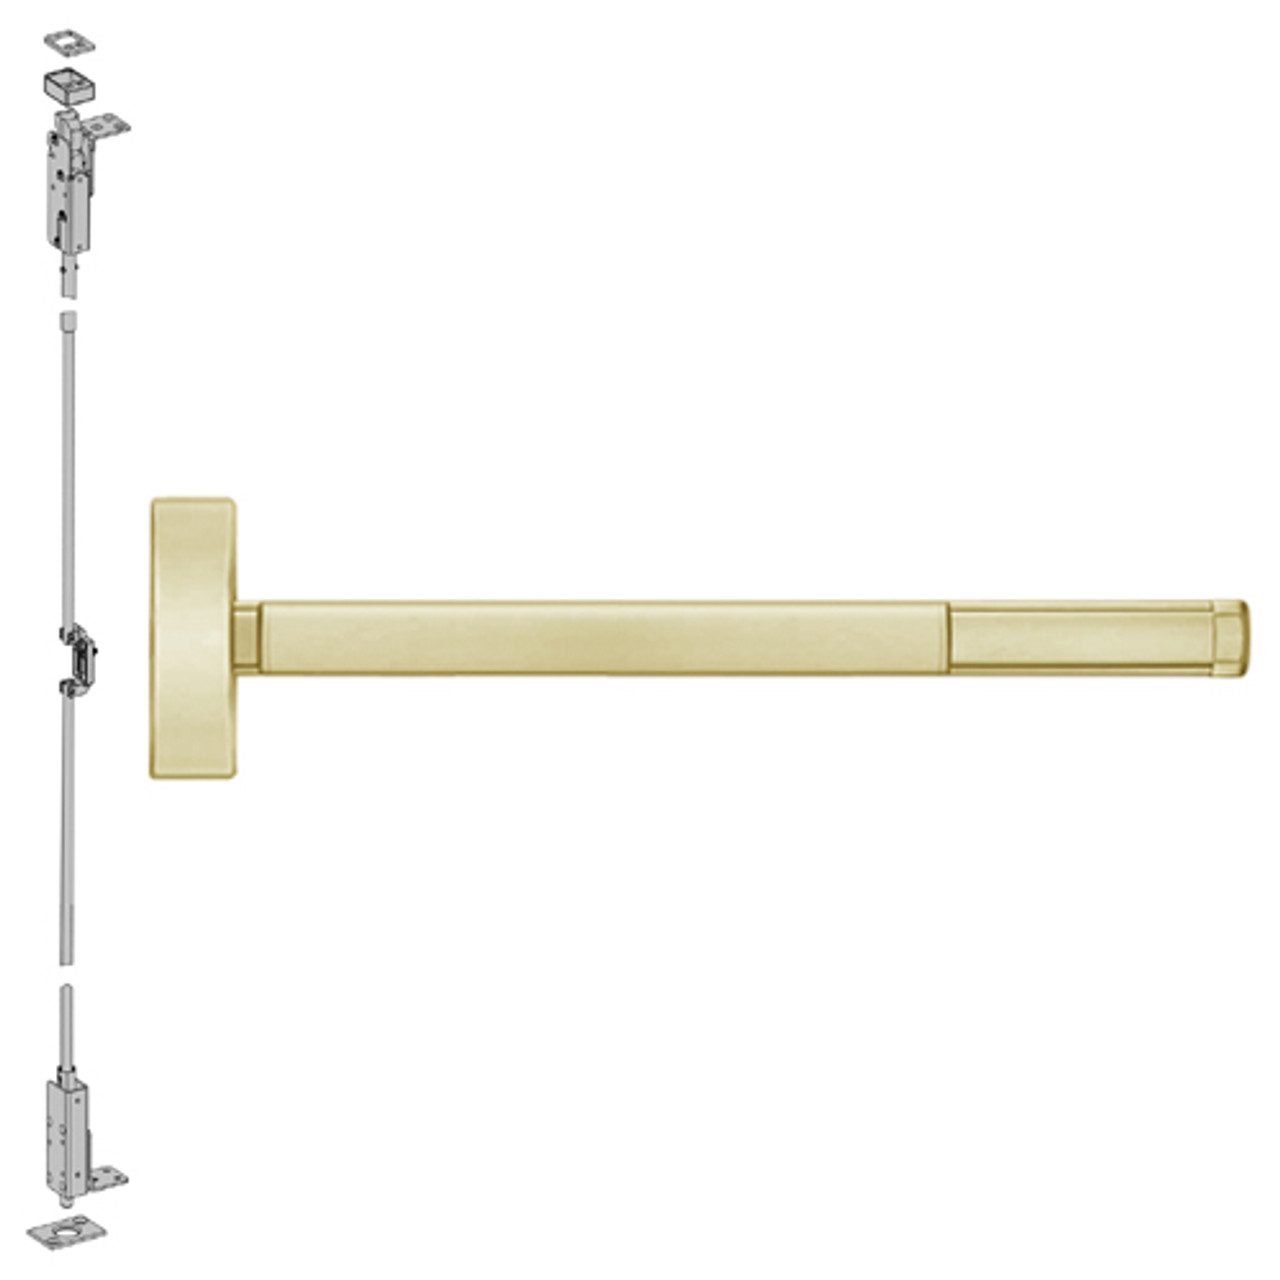 DE2701-606-48 PHI 2700 Series Non Fire Rated Wood Door Concealed Vertical Exit Device Prepped for Cover Plate in Satin Brass Finish